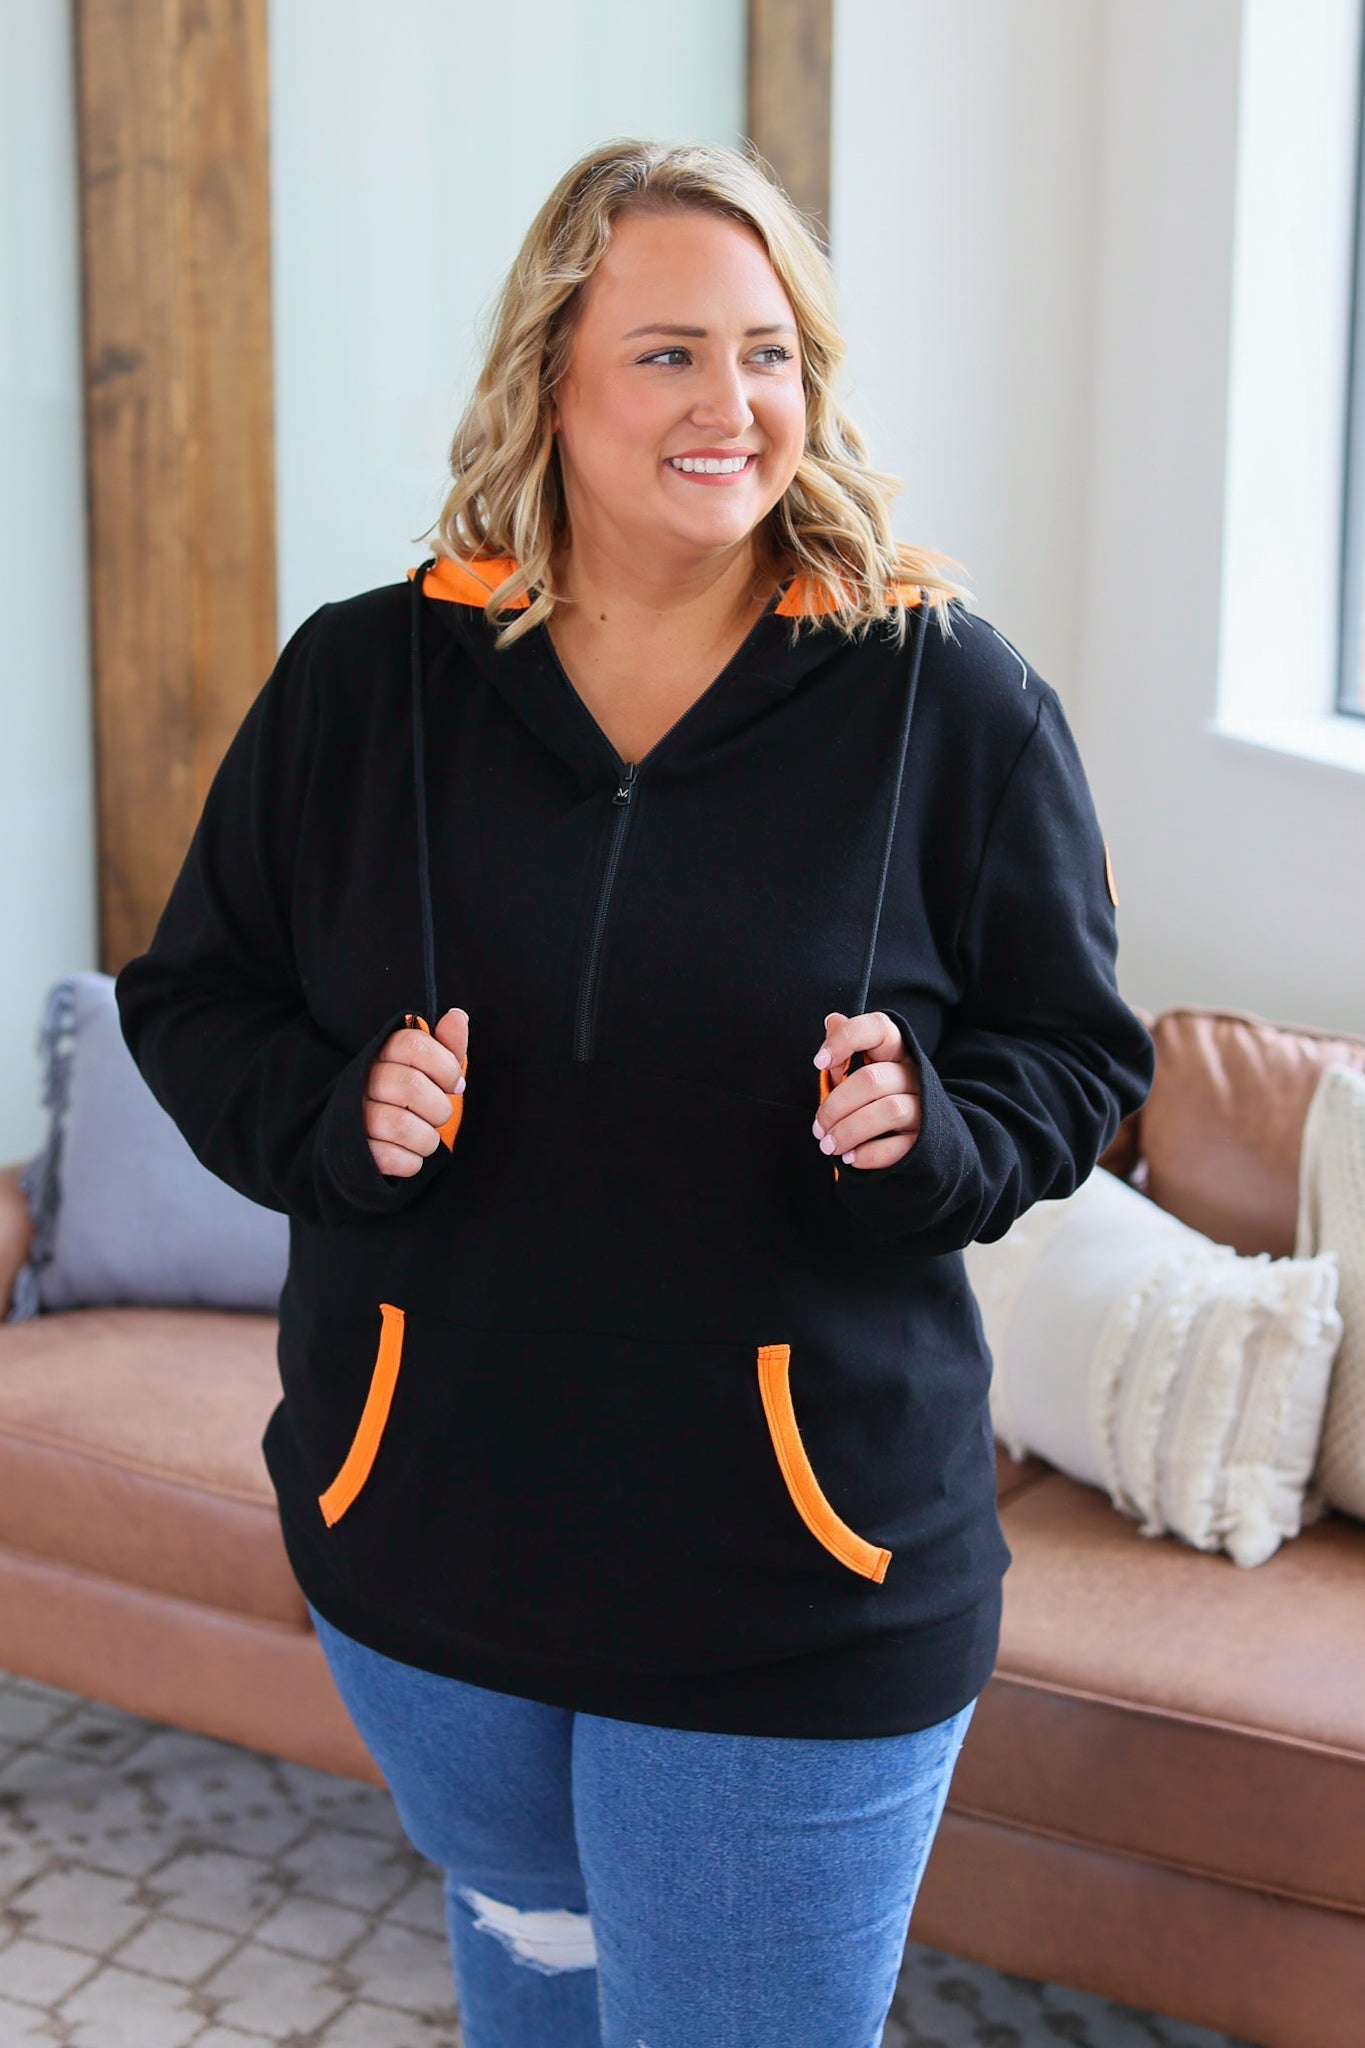 IN STOCK Avery Accent HalfZip Hoodie - Black and Orange - AnnRose Boutique